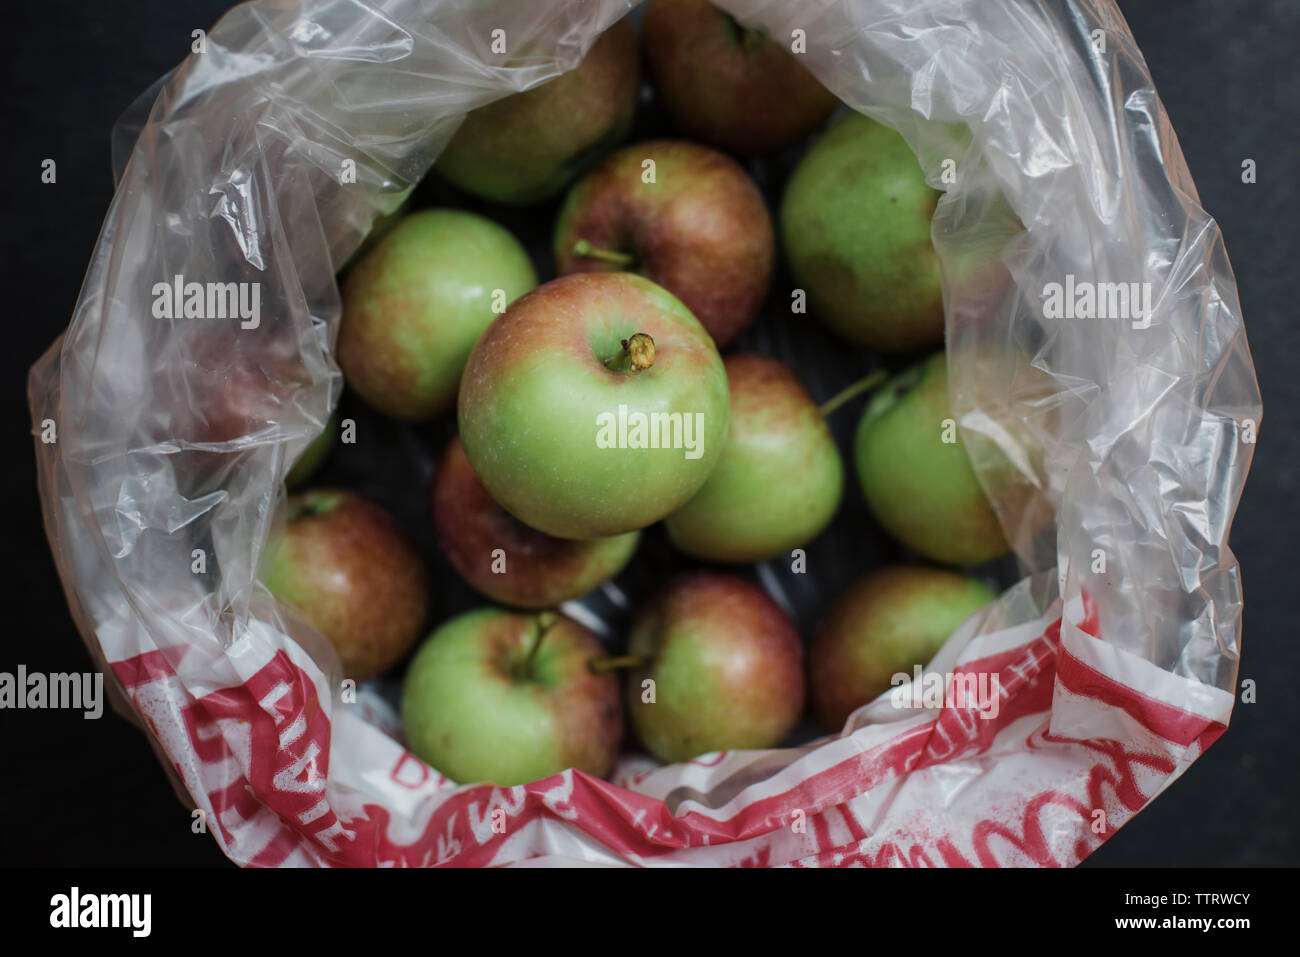 Overhead view of fresh harvested apples in plastic bag on table Stock Photo